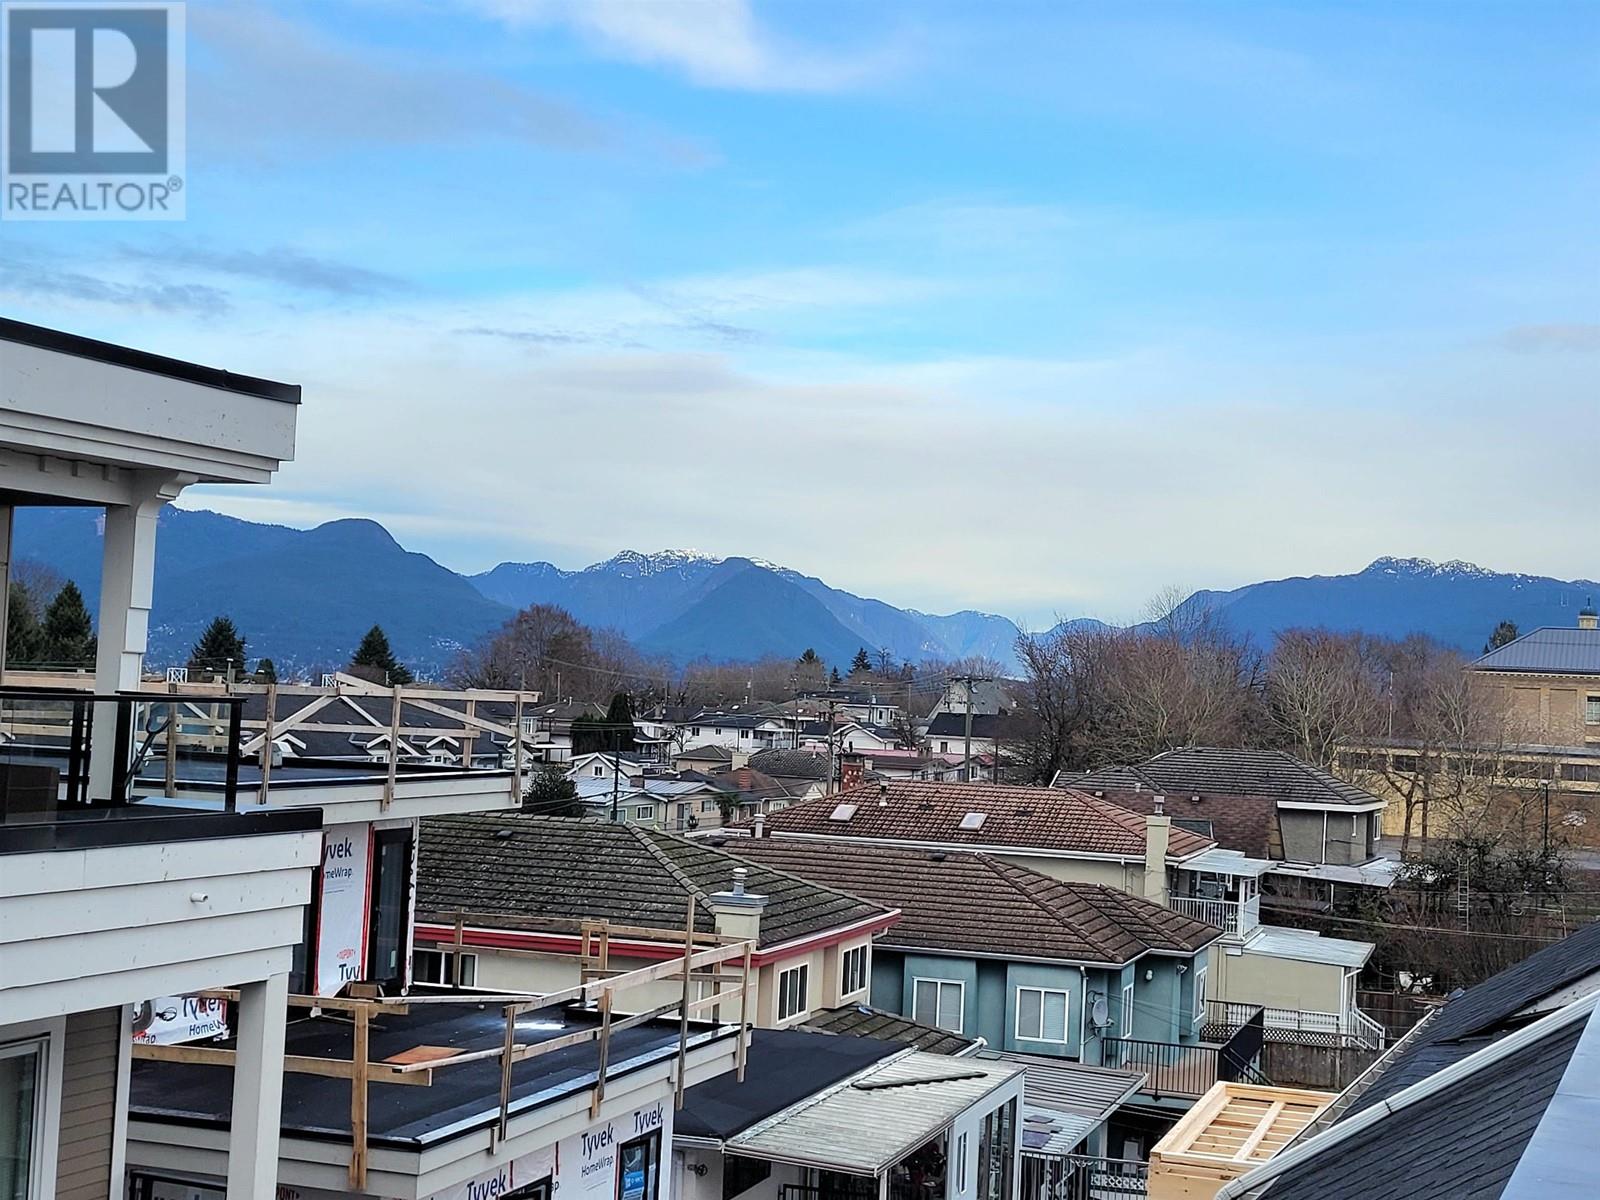 225 4858 SLOCAN STREET located in Vancouver, British Columbia